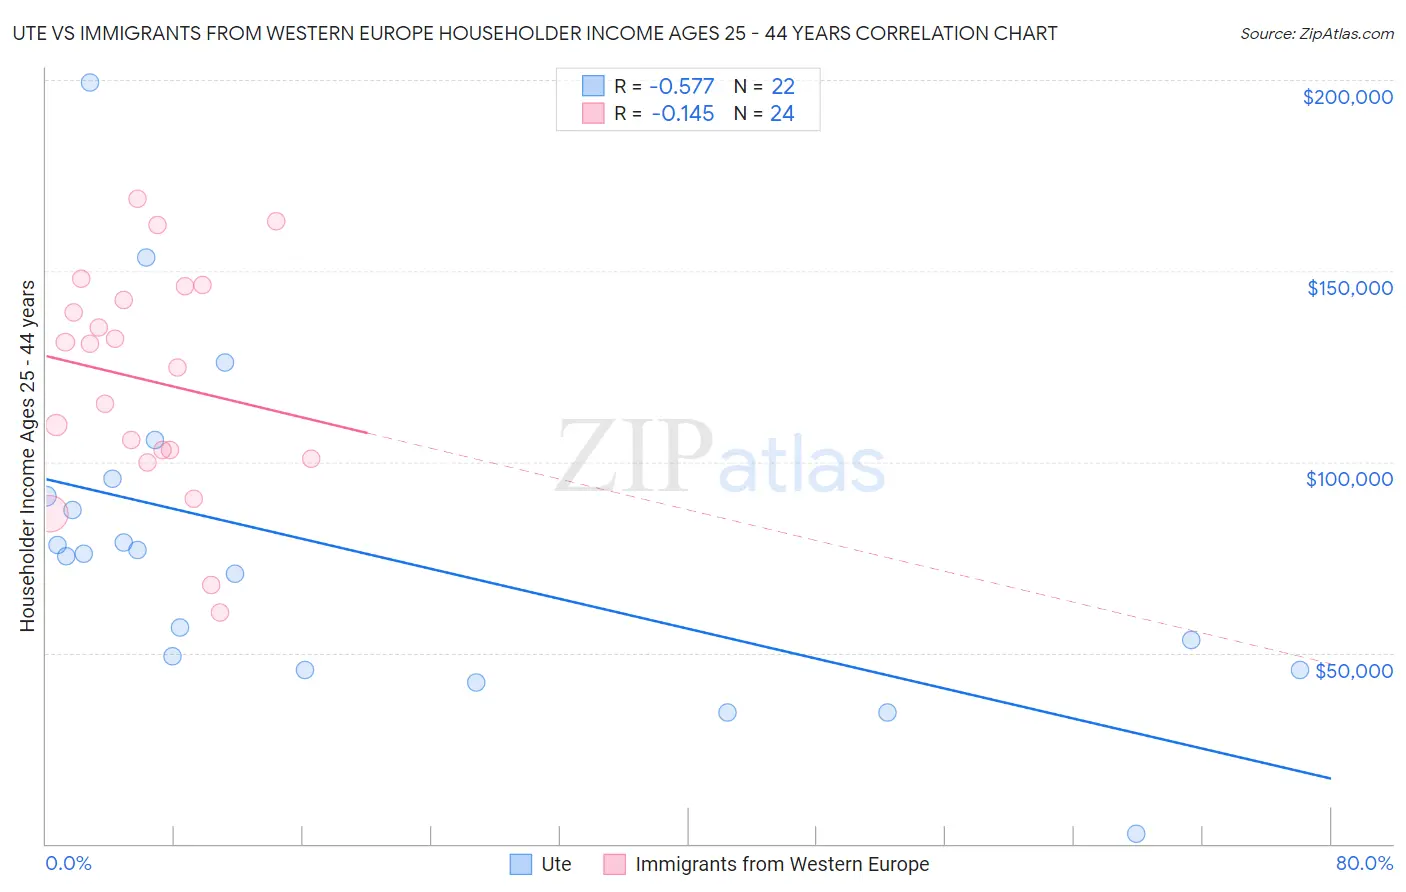 Ute vs Immigrants from Western Europe Householder Income Ages 25 - 44 years